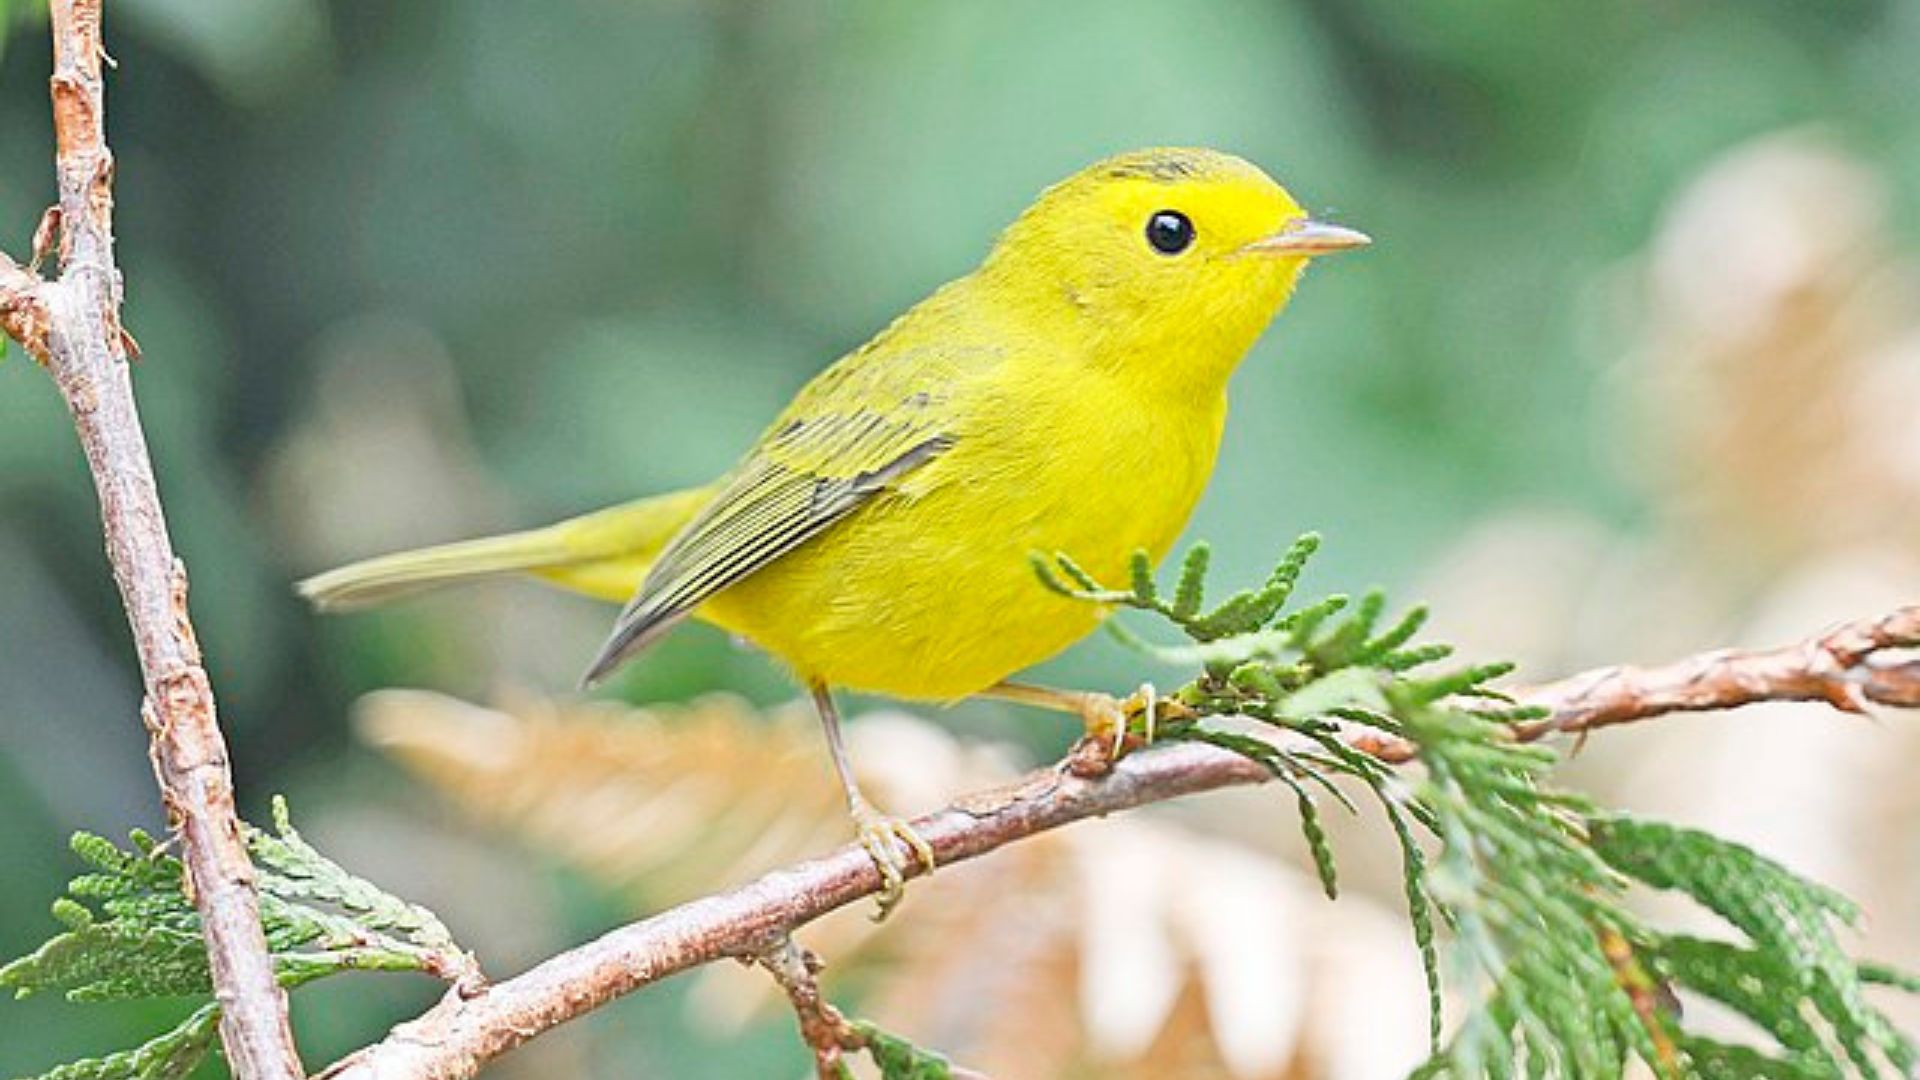 A bright yellow warbler bird perched on a tree branch